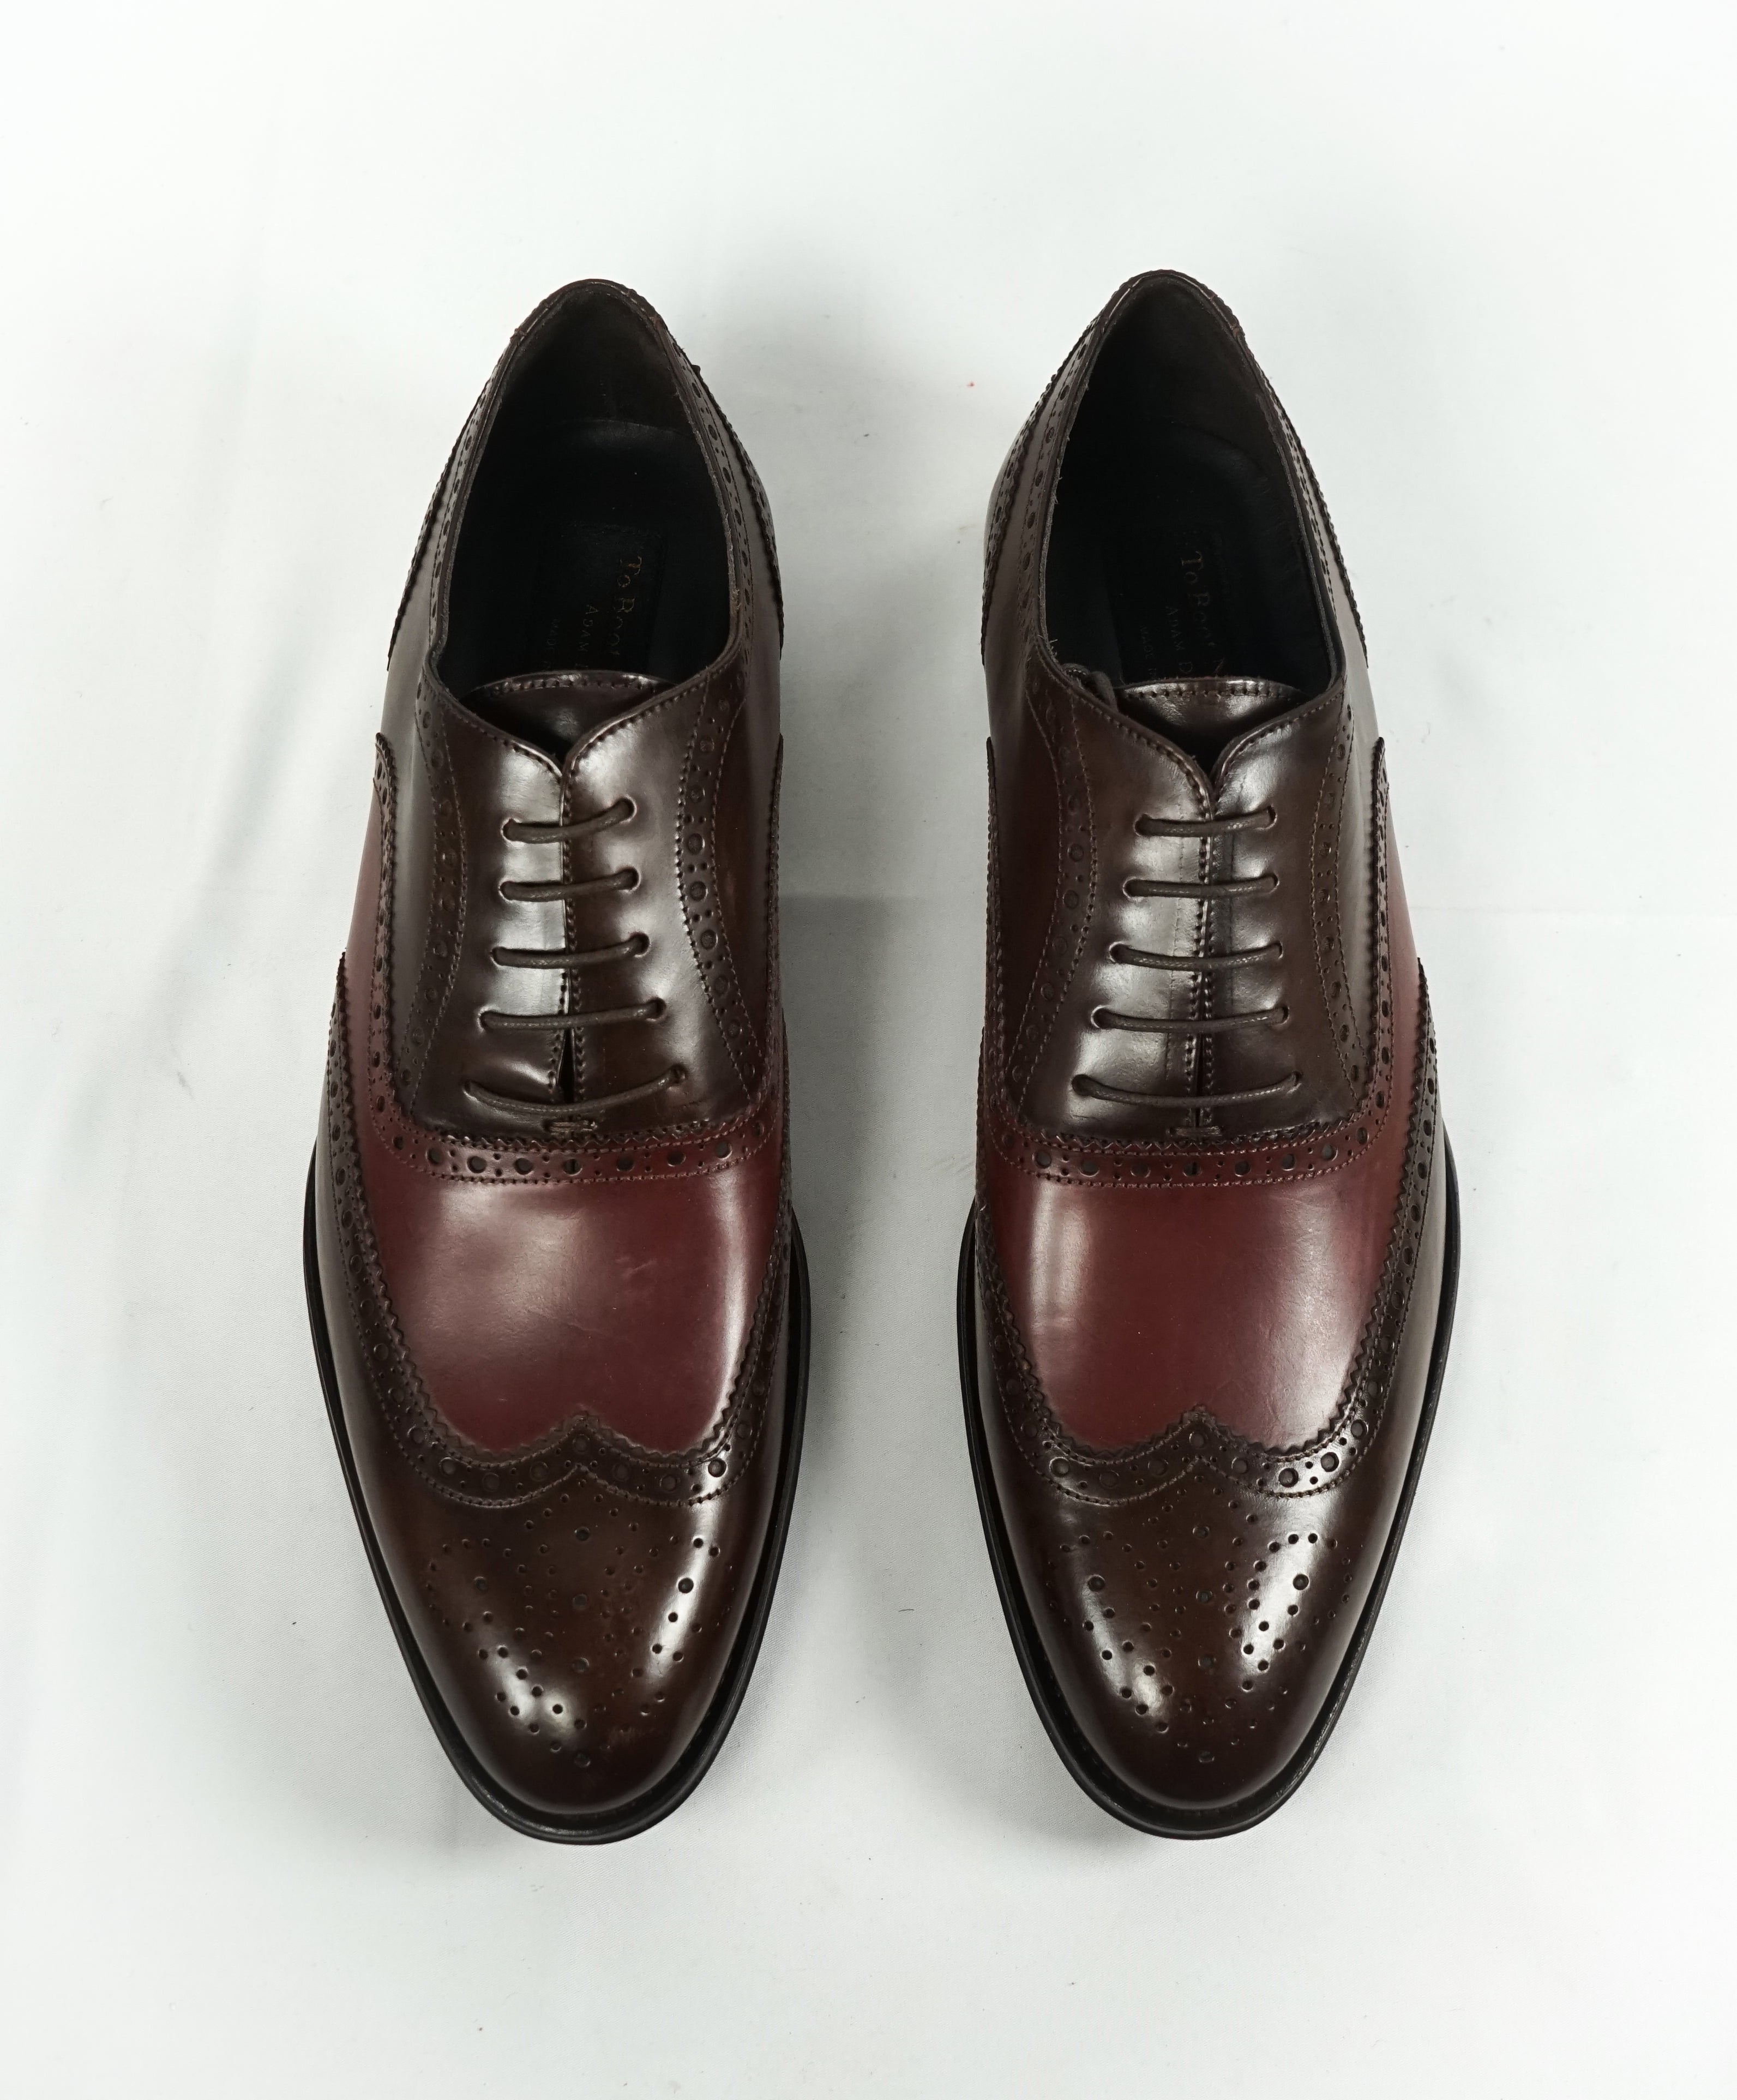 TO BOOT NEW YORK - Two Tone Wingtip Brogue Oxford Brown/Oxblood - 10 ...